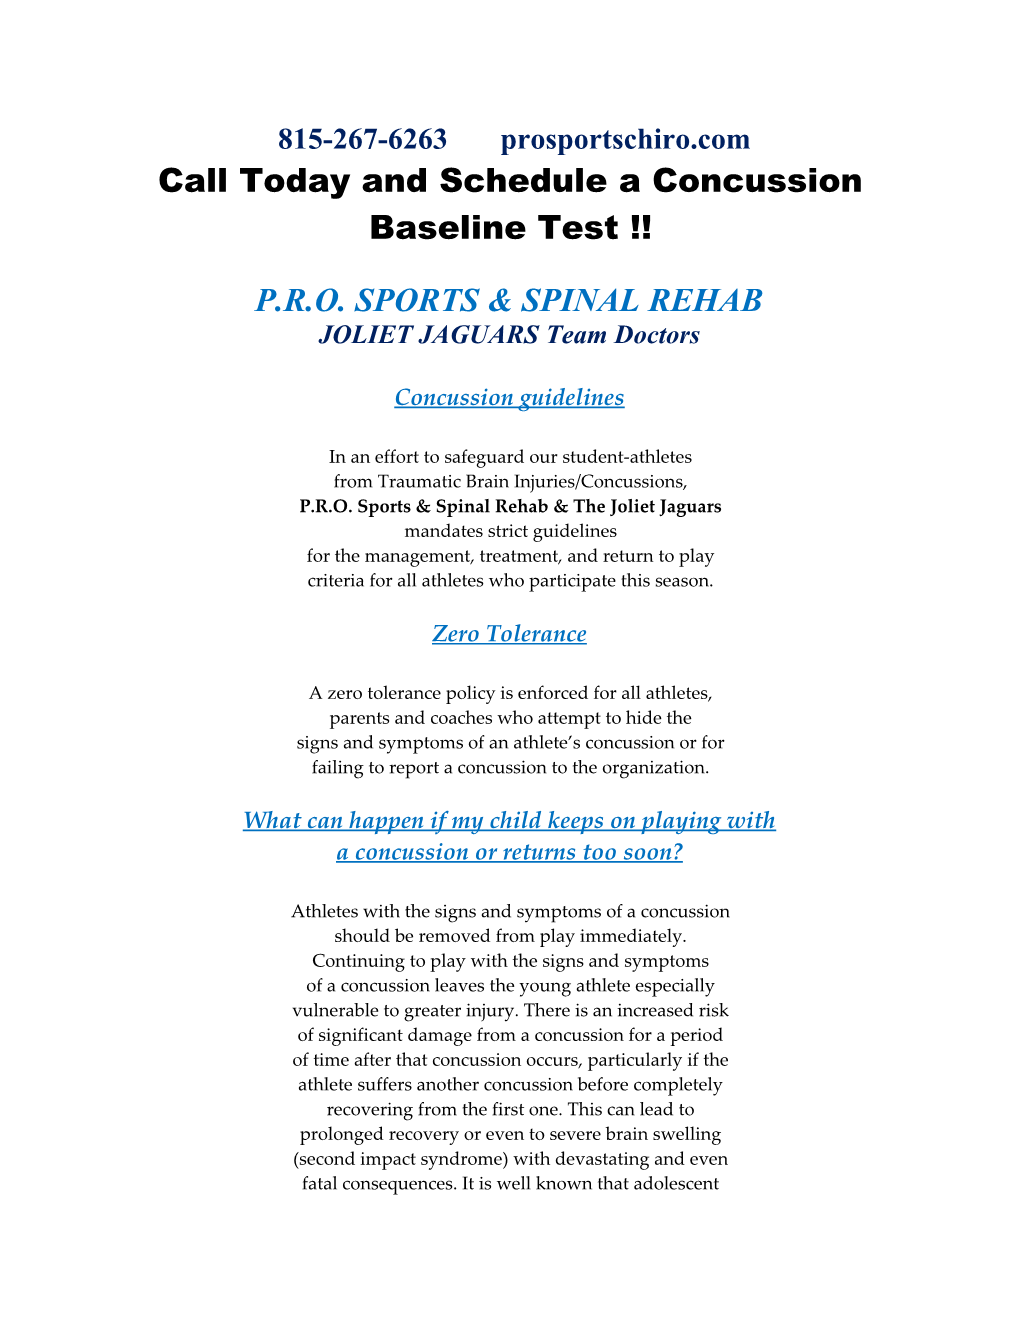 Call Today and Schedule a Concussion Baseline Test